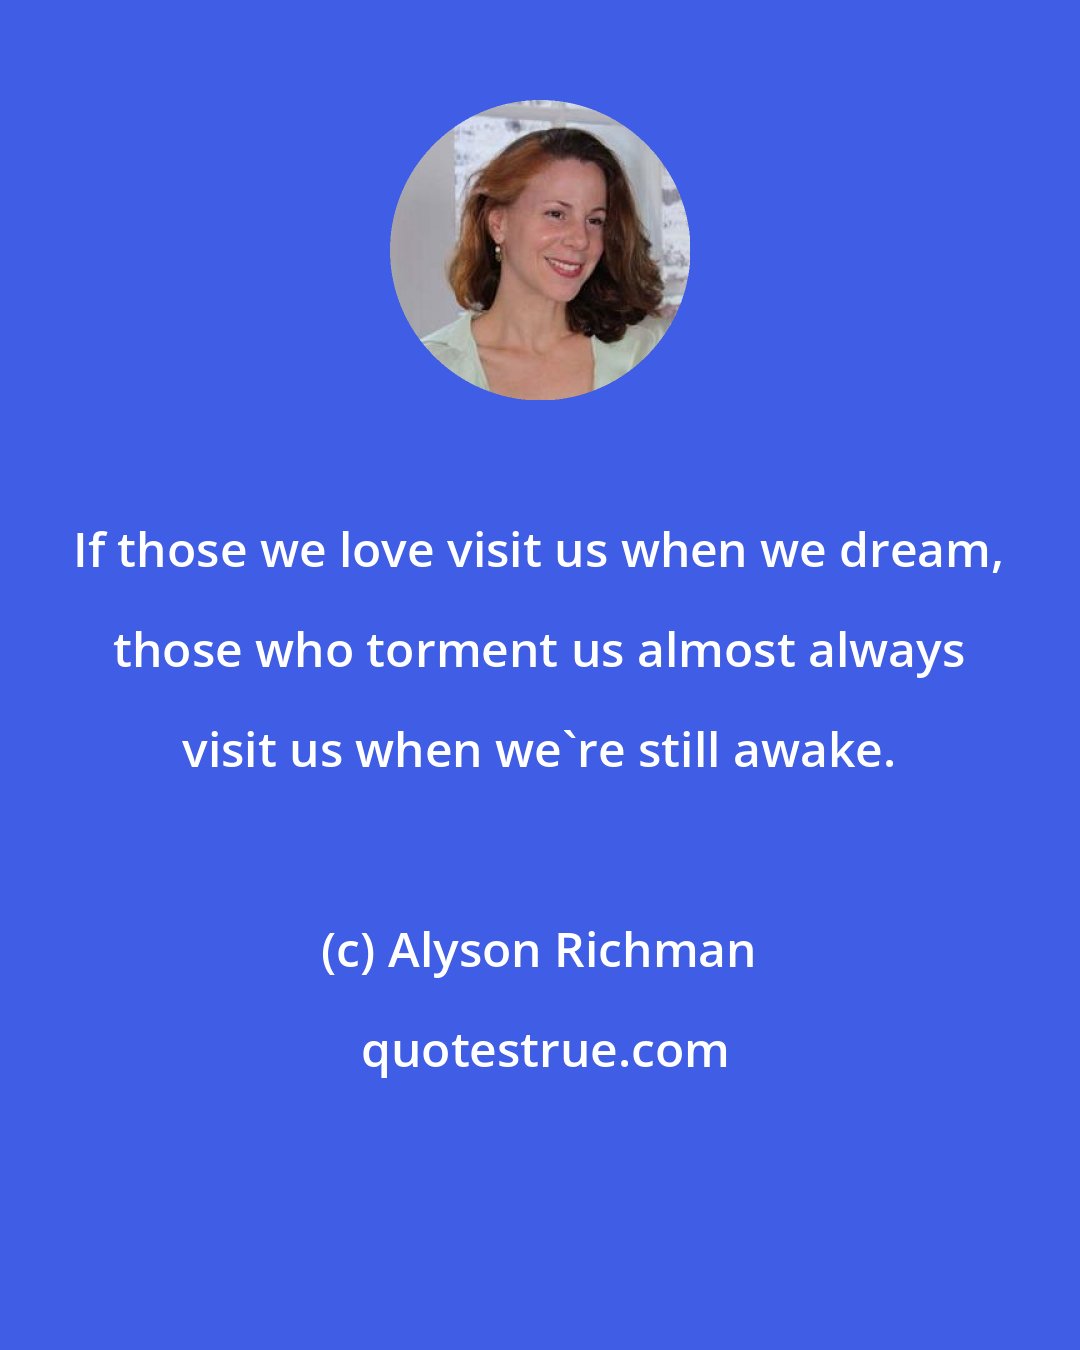 Alyson Richman: If those we love visit us when we dream, those who torment us almost always visit us when we're still awake.